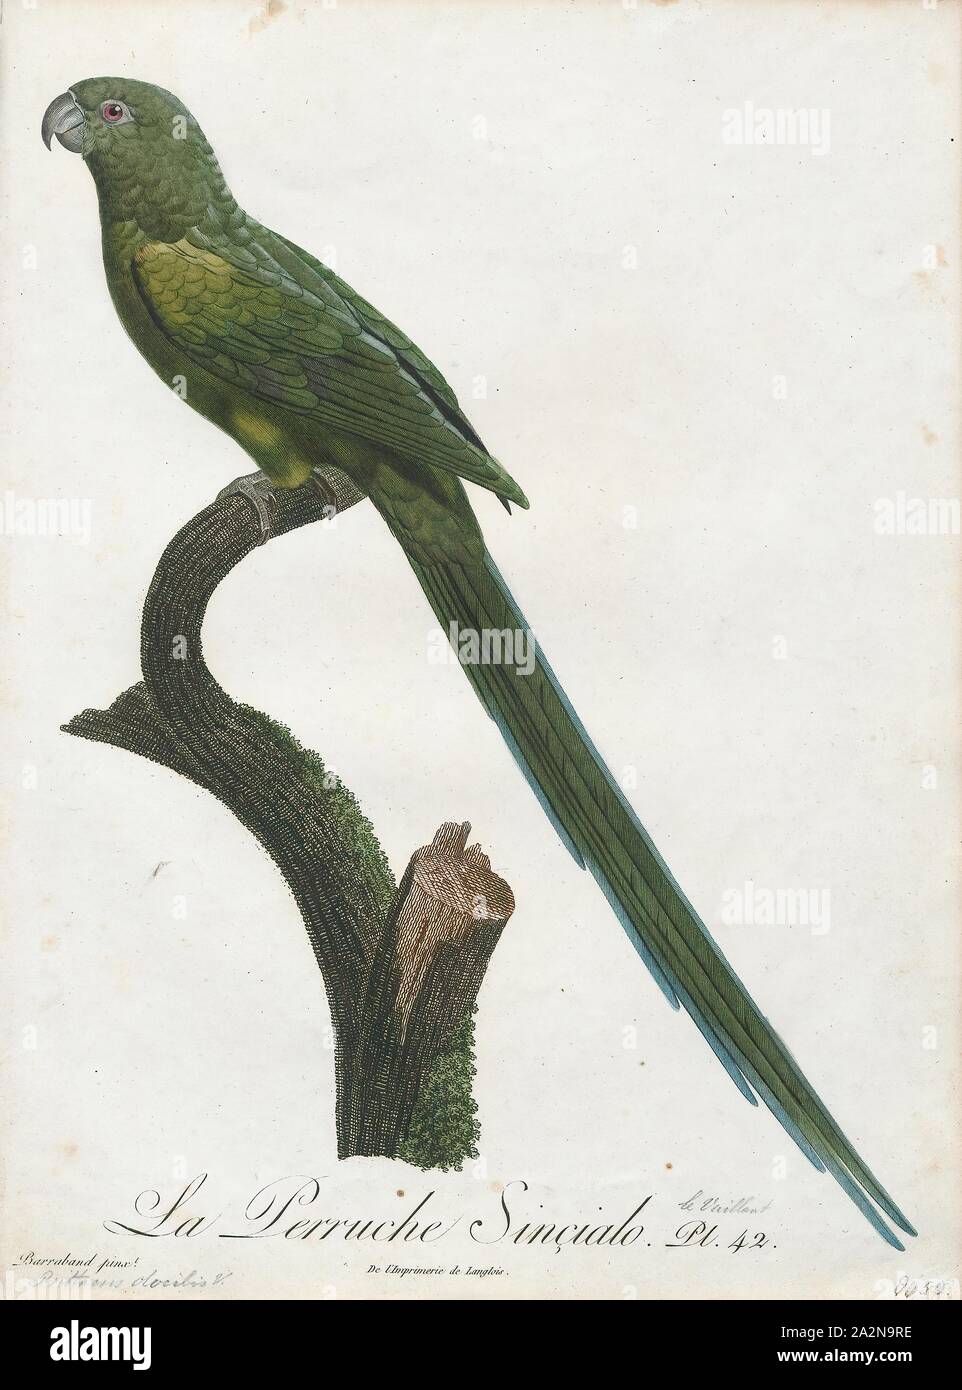 Palaeornis docilis, Print, Psittacula, Members of the parrot genus Psittacula or Afro-Asian ring-necked parakeets as they are commonly known in aviculture originates found from Africa to South-East Asia. It is a widespread group, with a clear concentration of species in south Asia, but also with representatives in Africa and the islands of the Indian Ocean. This is the only genus of Parrot which has the majority of its species in continental Asia. Of all the extant species only Psittacula calthropae, Psittacula caniceps and Psittacula echo do not have a representative subspecies in any part of Stock Photo